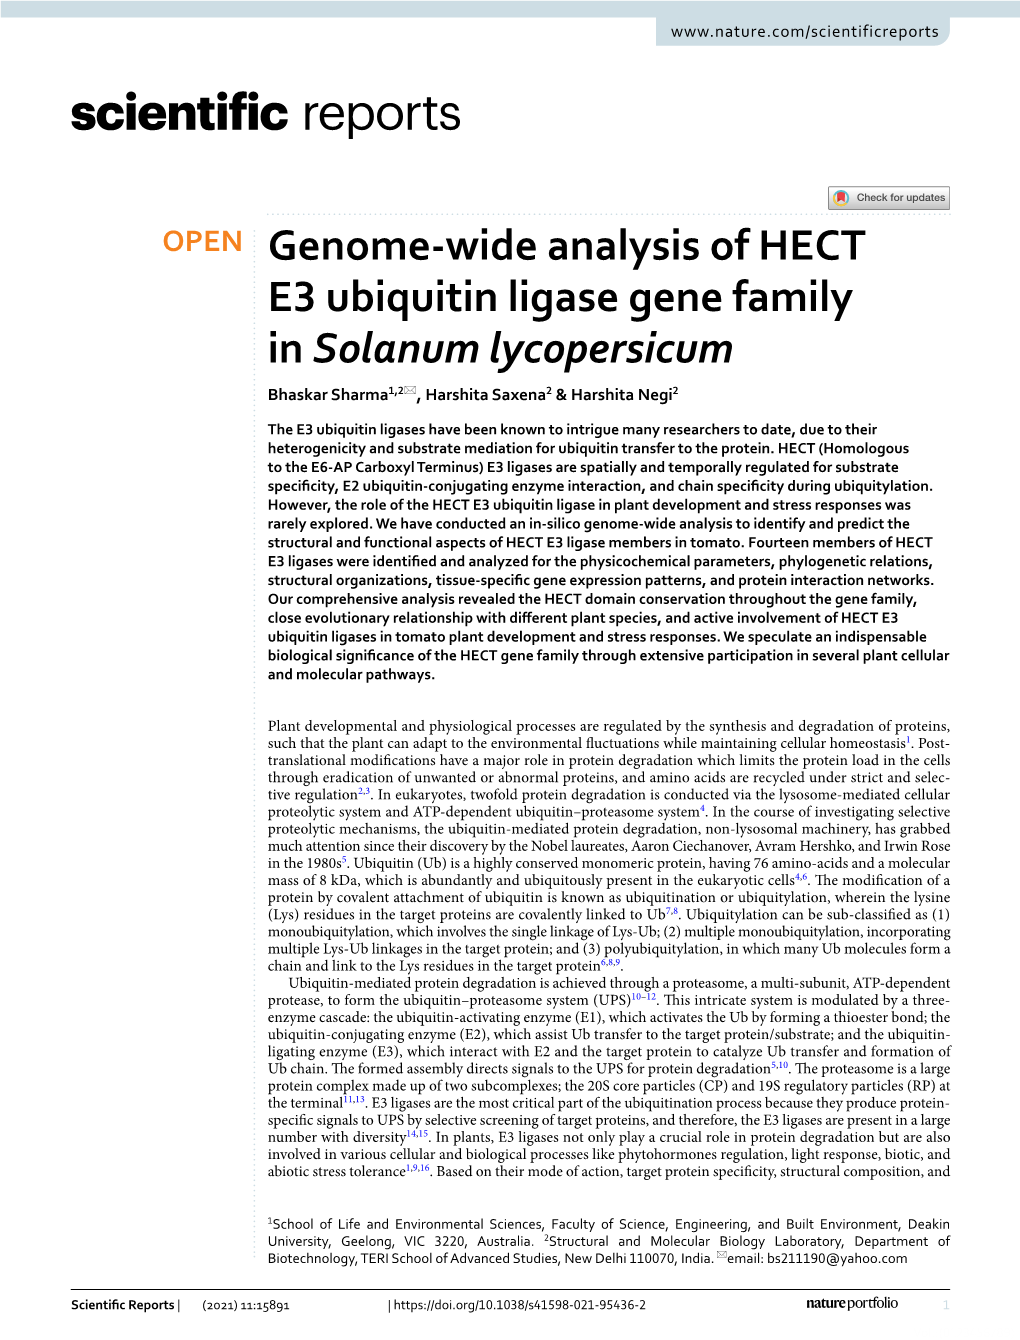 Genome-Wide Analysis of HECT E3 Ubiquitin Ligase Gene Family In